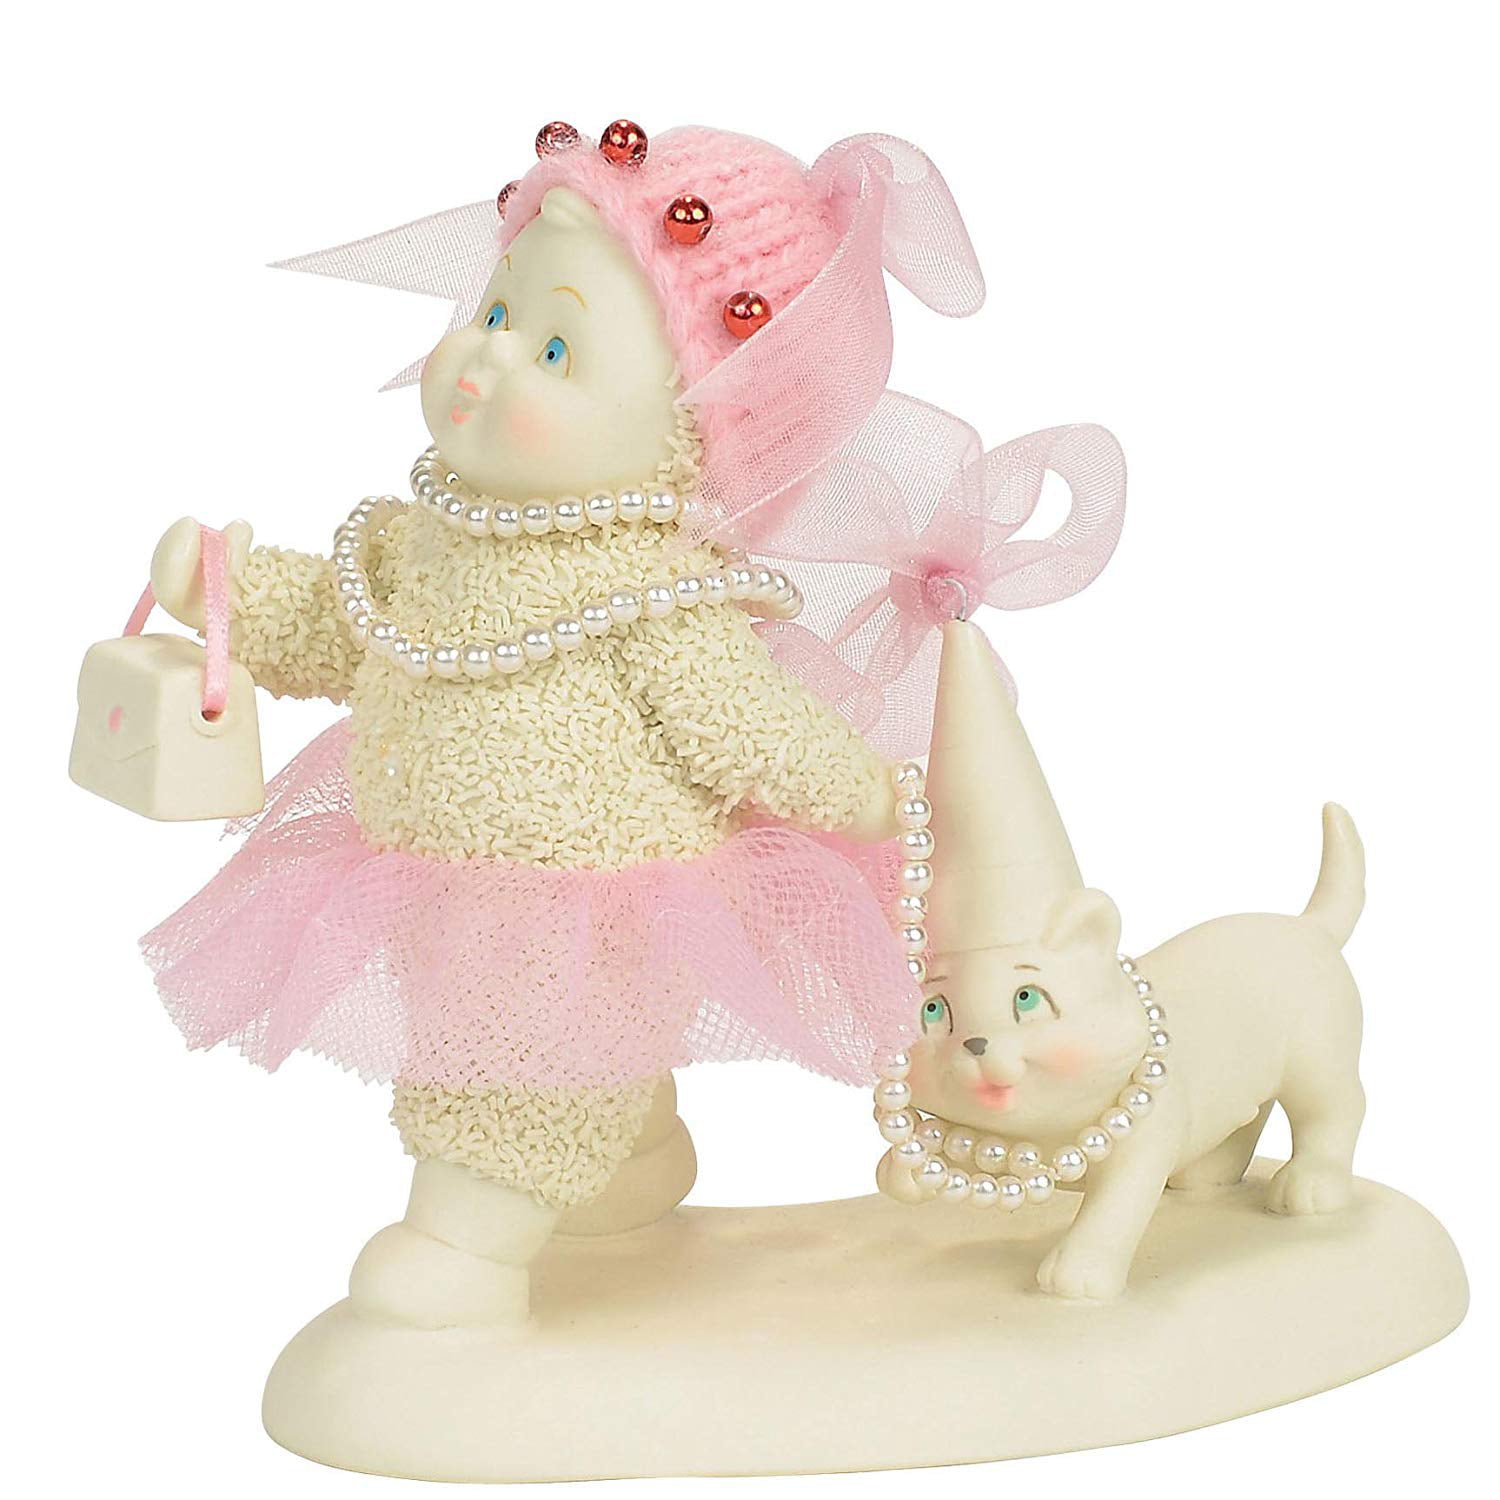 Department 56 Snowbabies Wish Upon a Star Figurine 5.125 inch